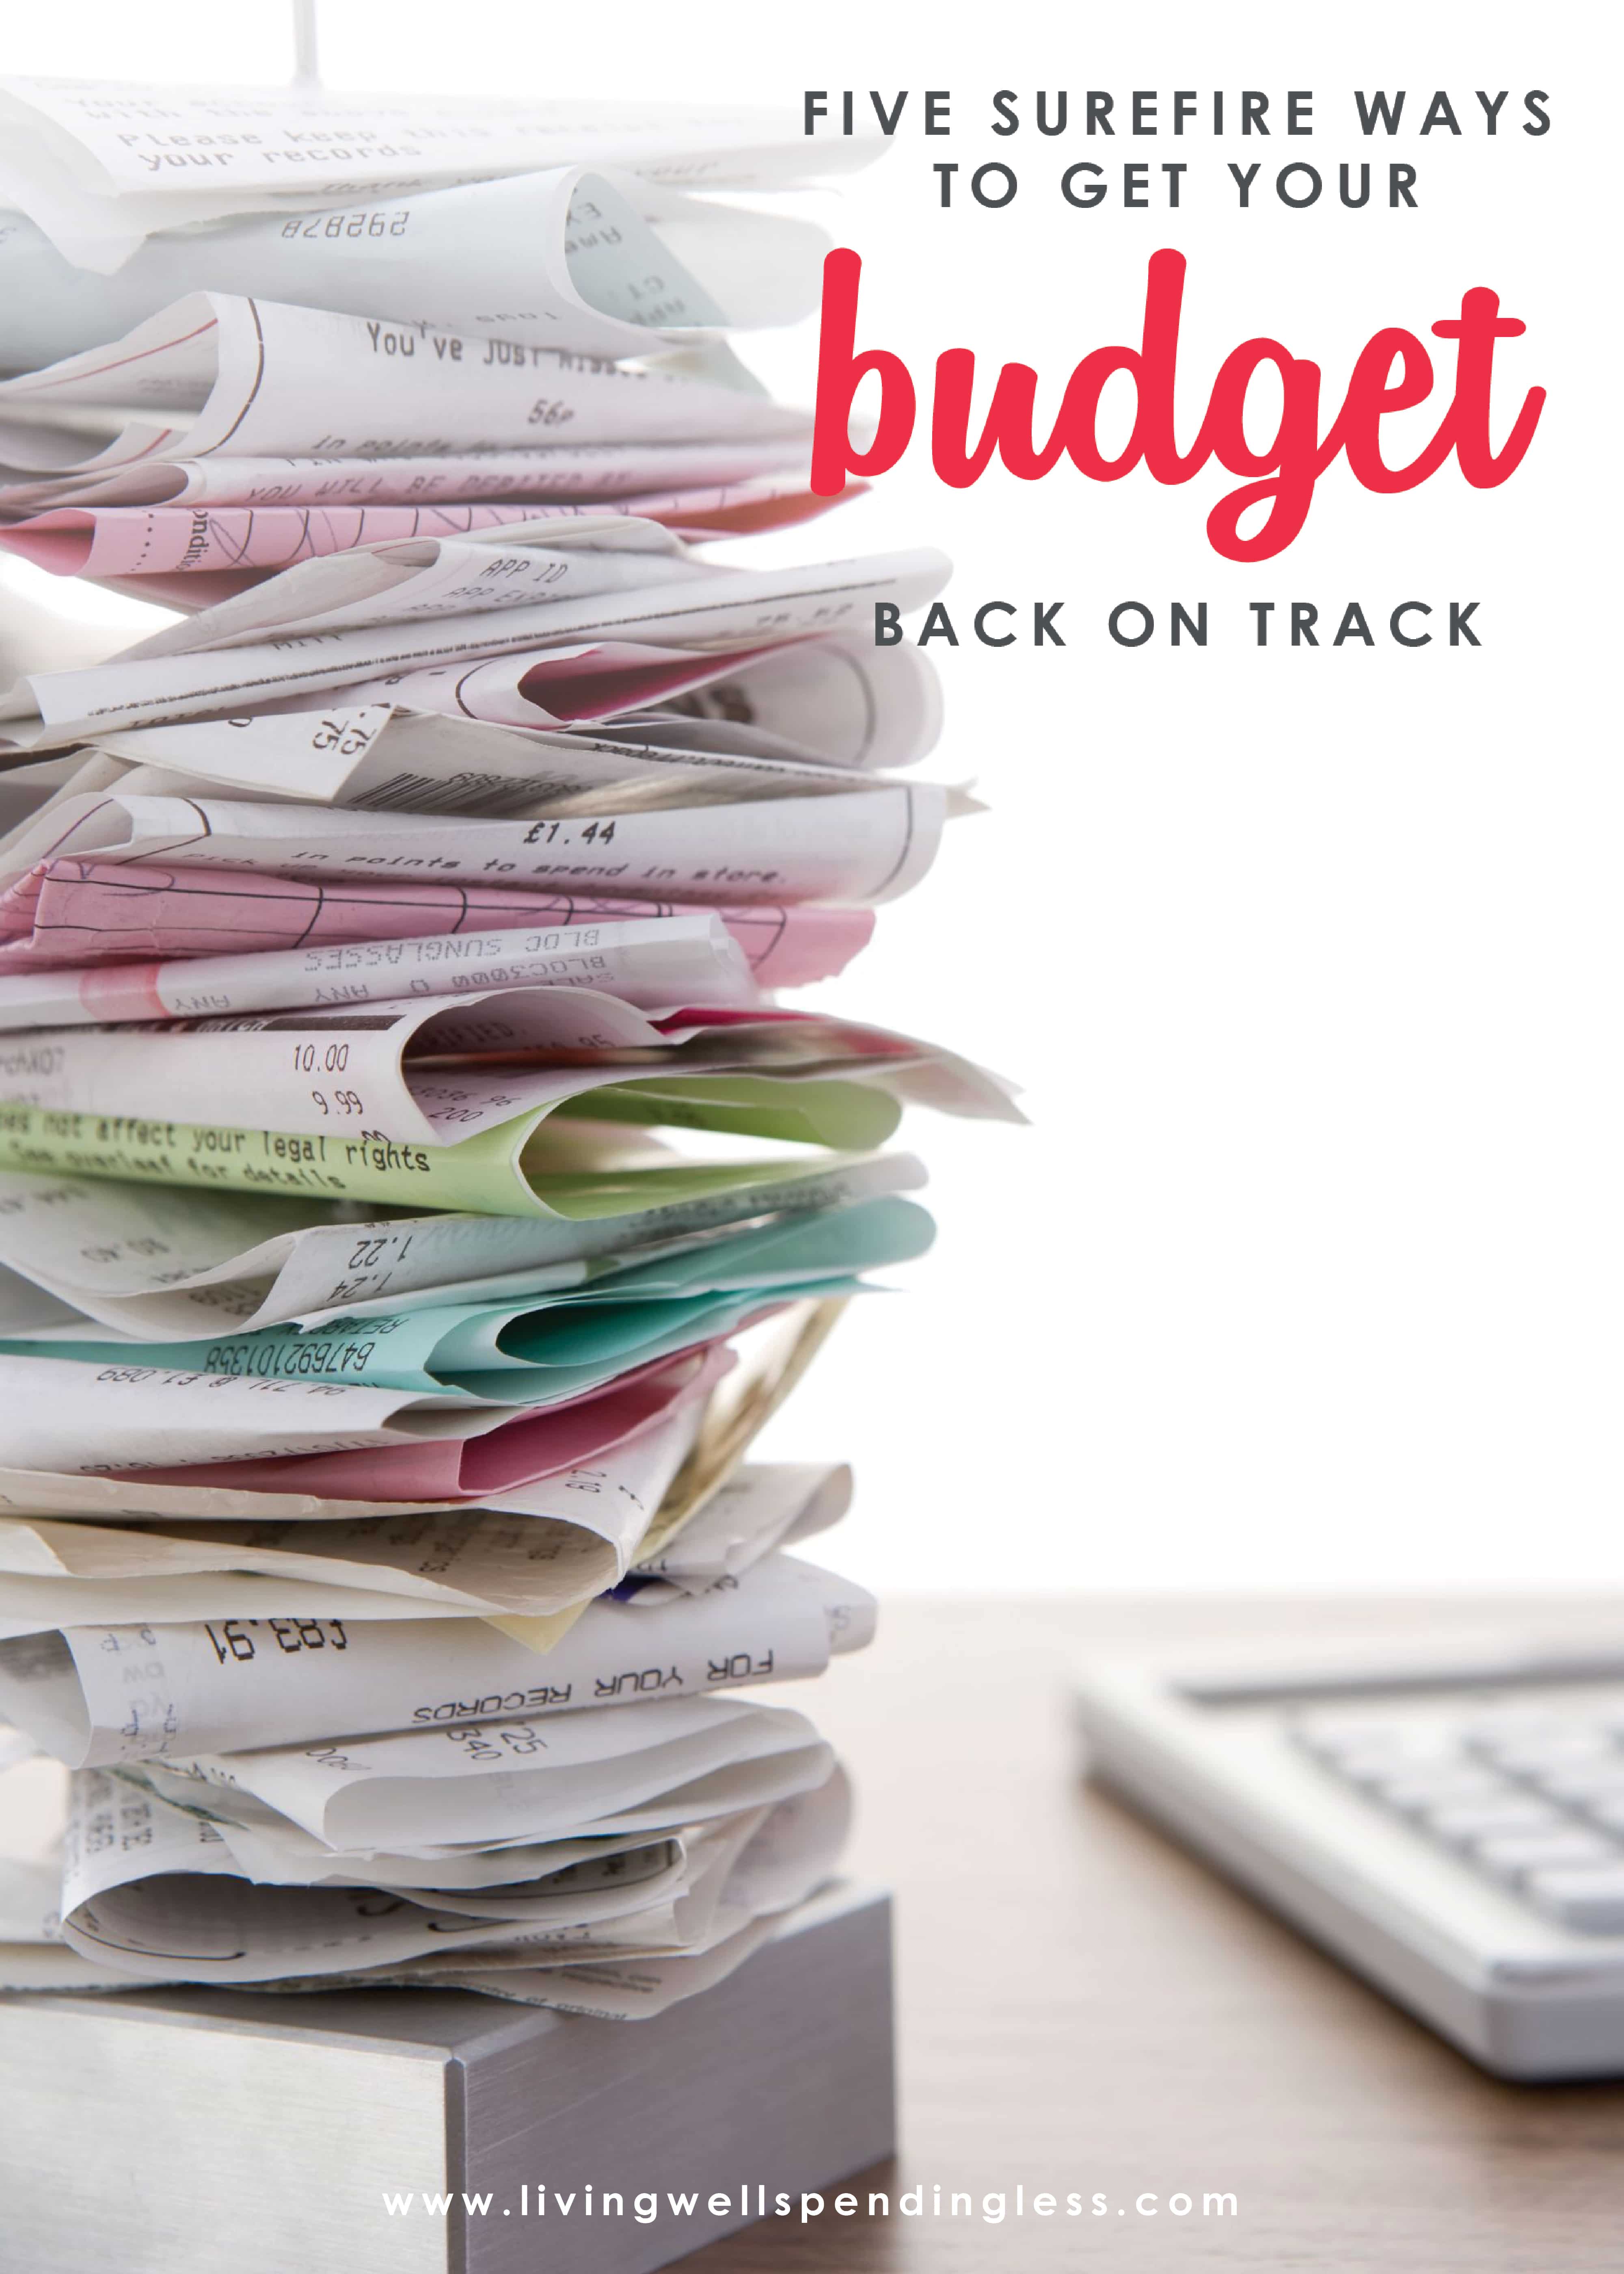 Spend too much over the holidays? It's not too late to turn things around! Don't miss these 5 surefire ways to get your budget right back on track for the New Year!